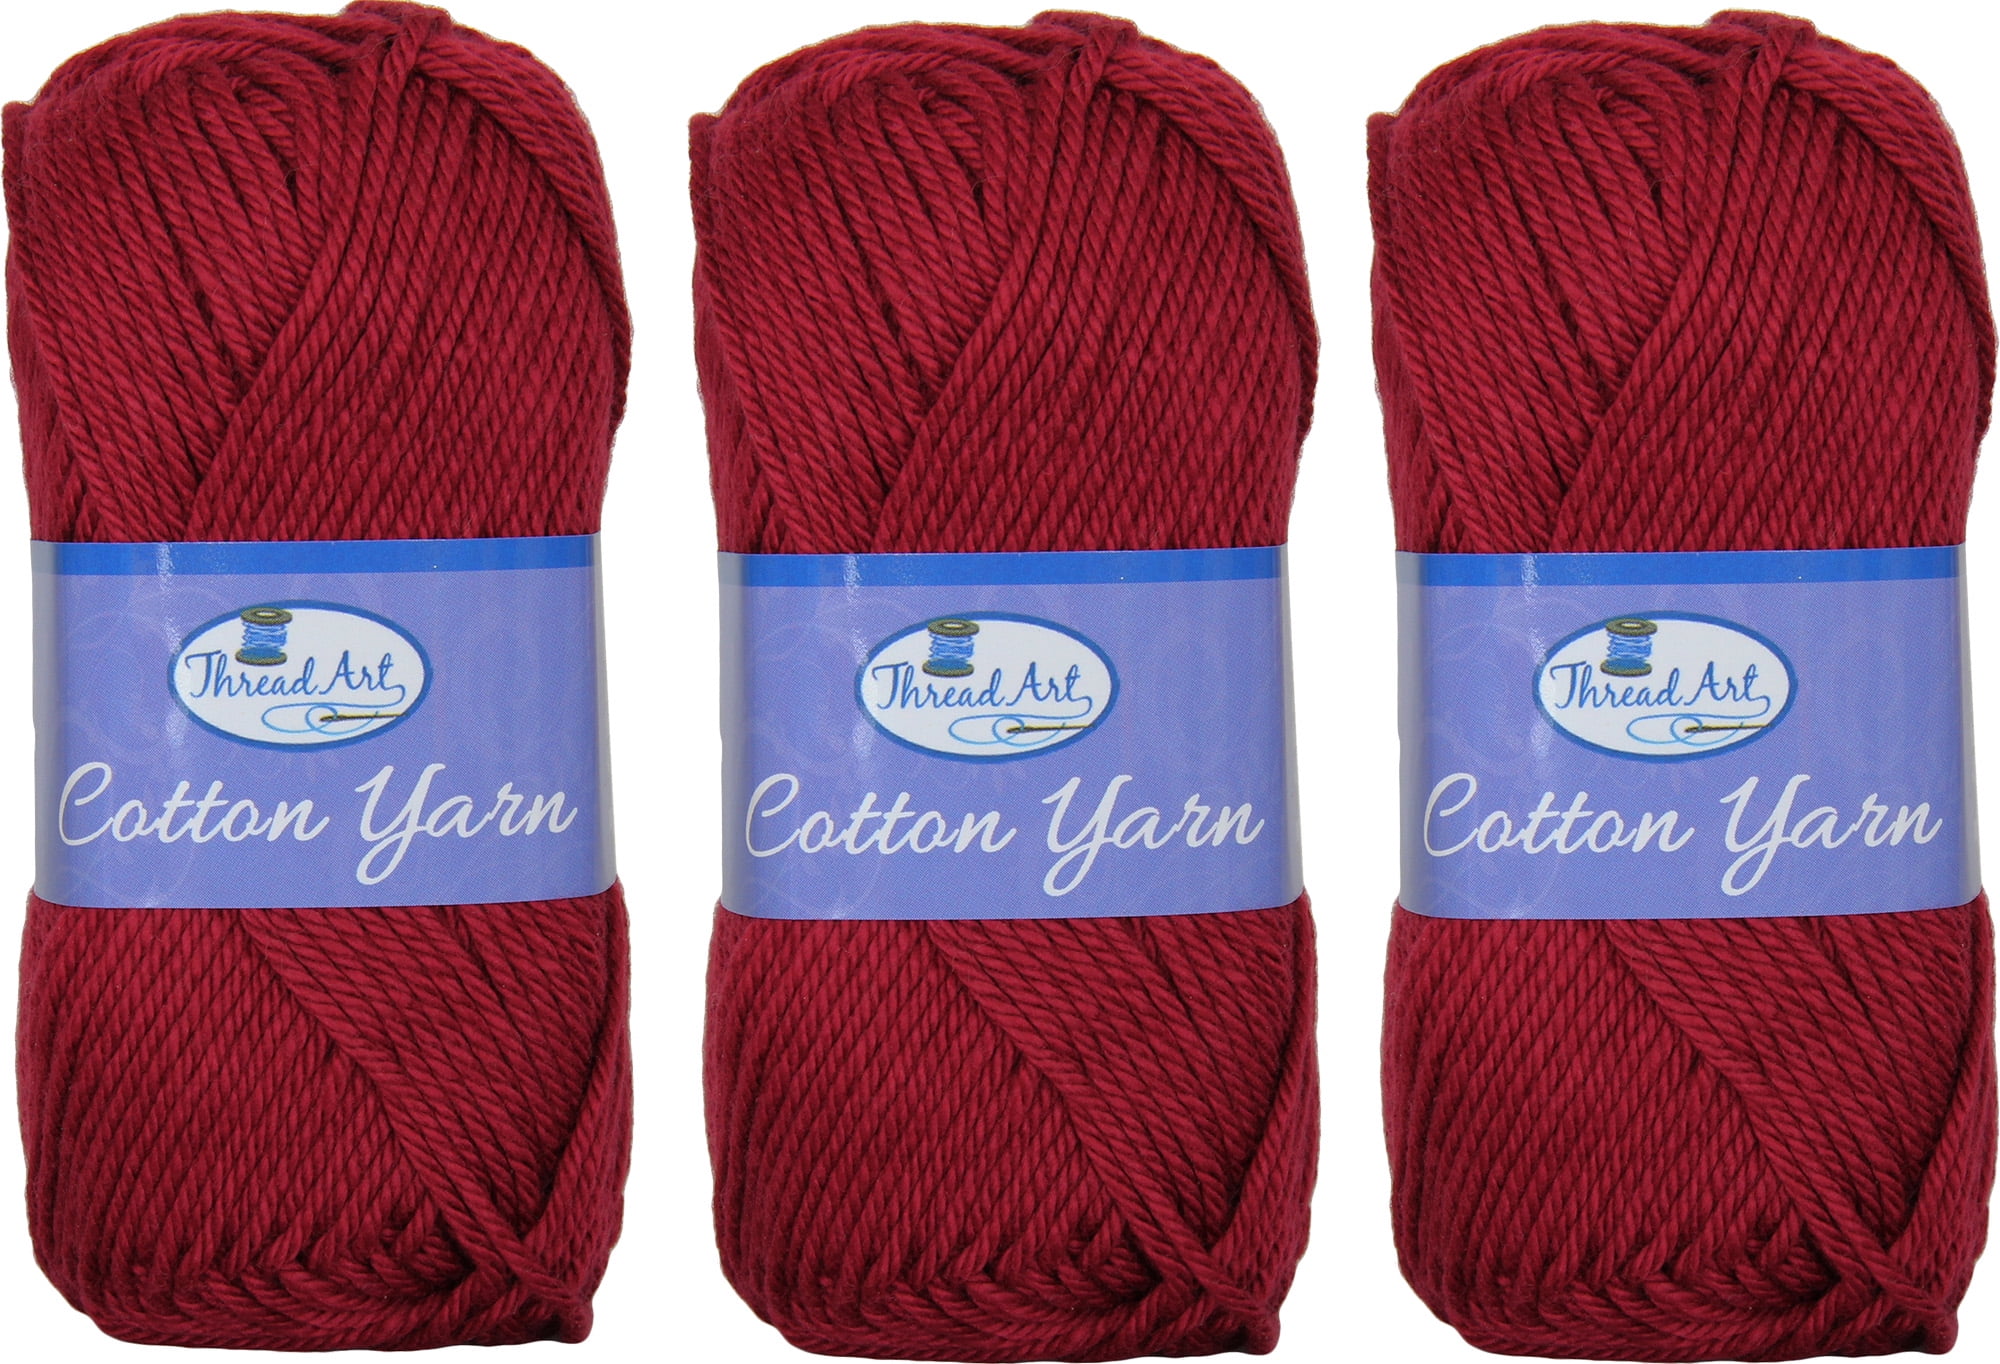 Red Heart yarn 'Margareta', 100% Acrylic (10 skeins), colors in assortment  Soft Cotton Knitting Wool Thick Fiber Velvet Hand Crochet for DIY Sweater  needlework threads and crocheting flax